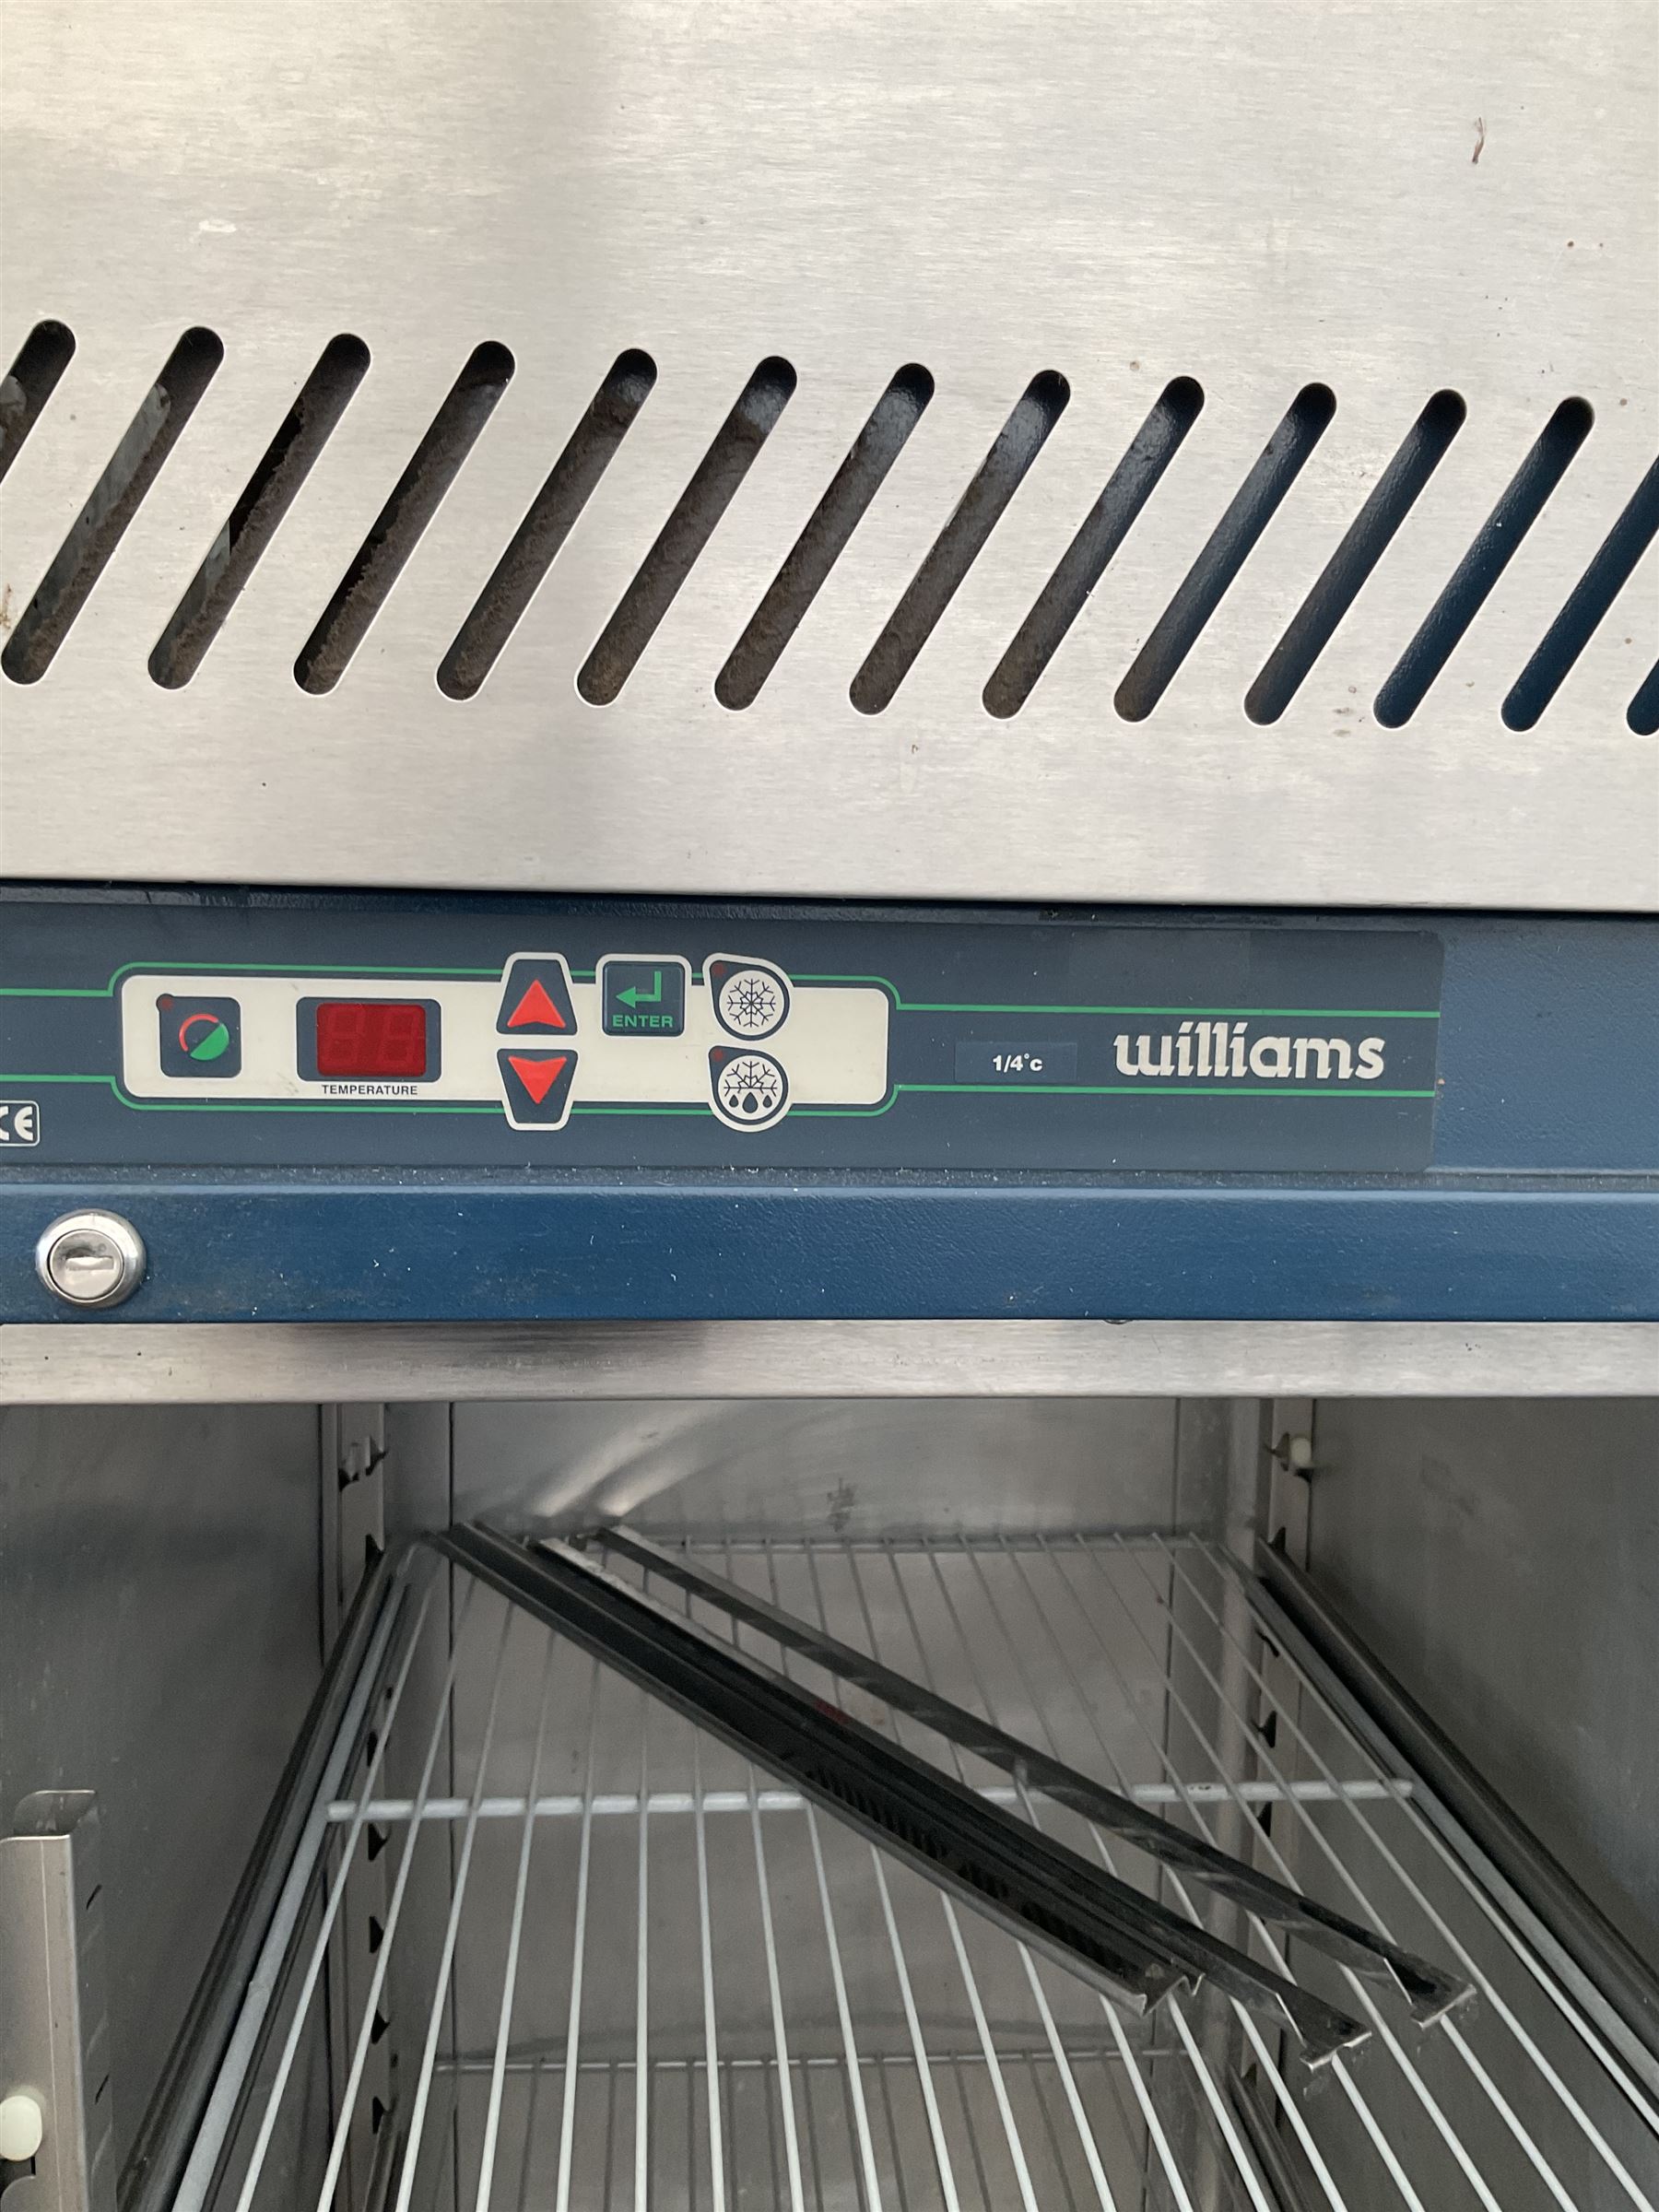 Williams - stainless steel commercial fridge - Image 3 of 6